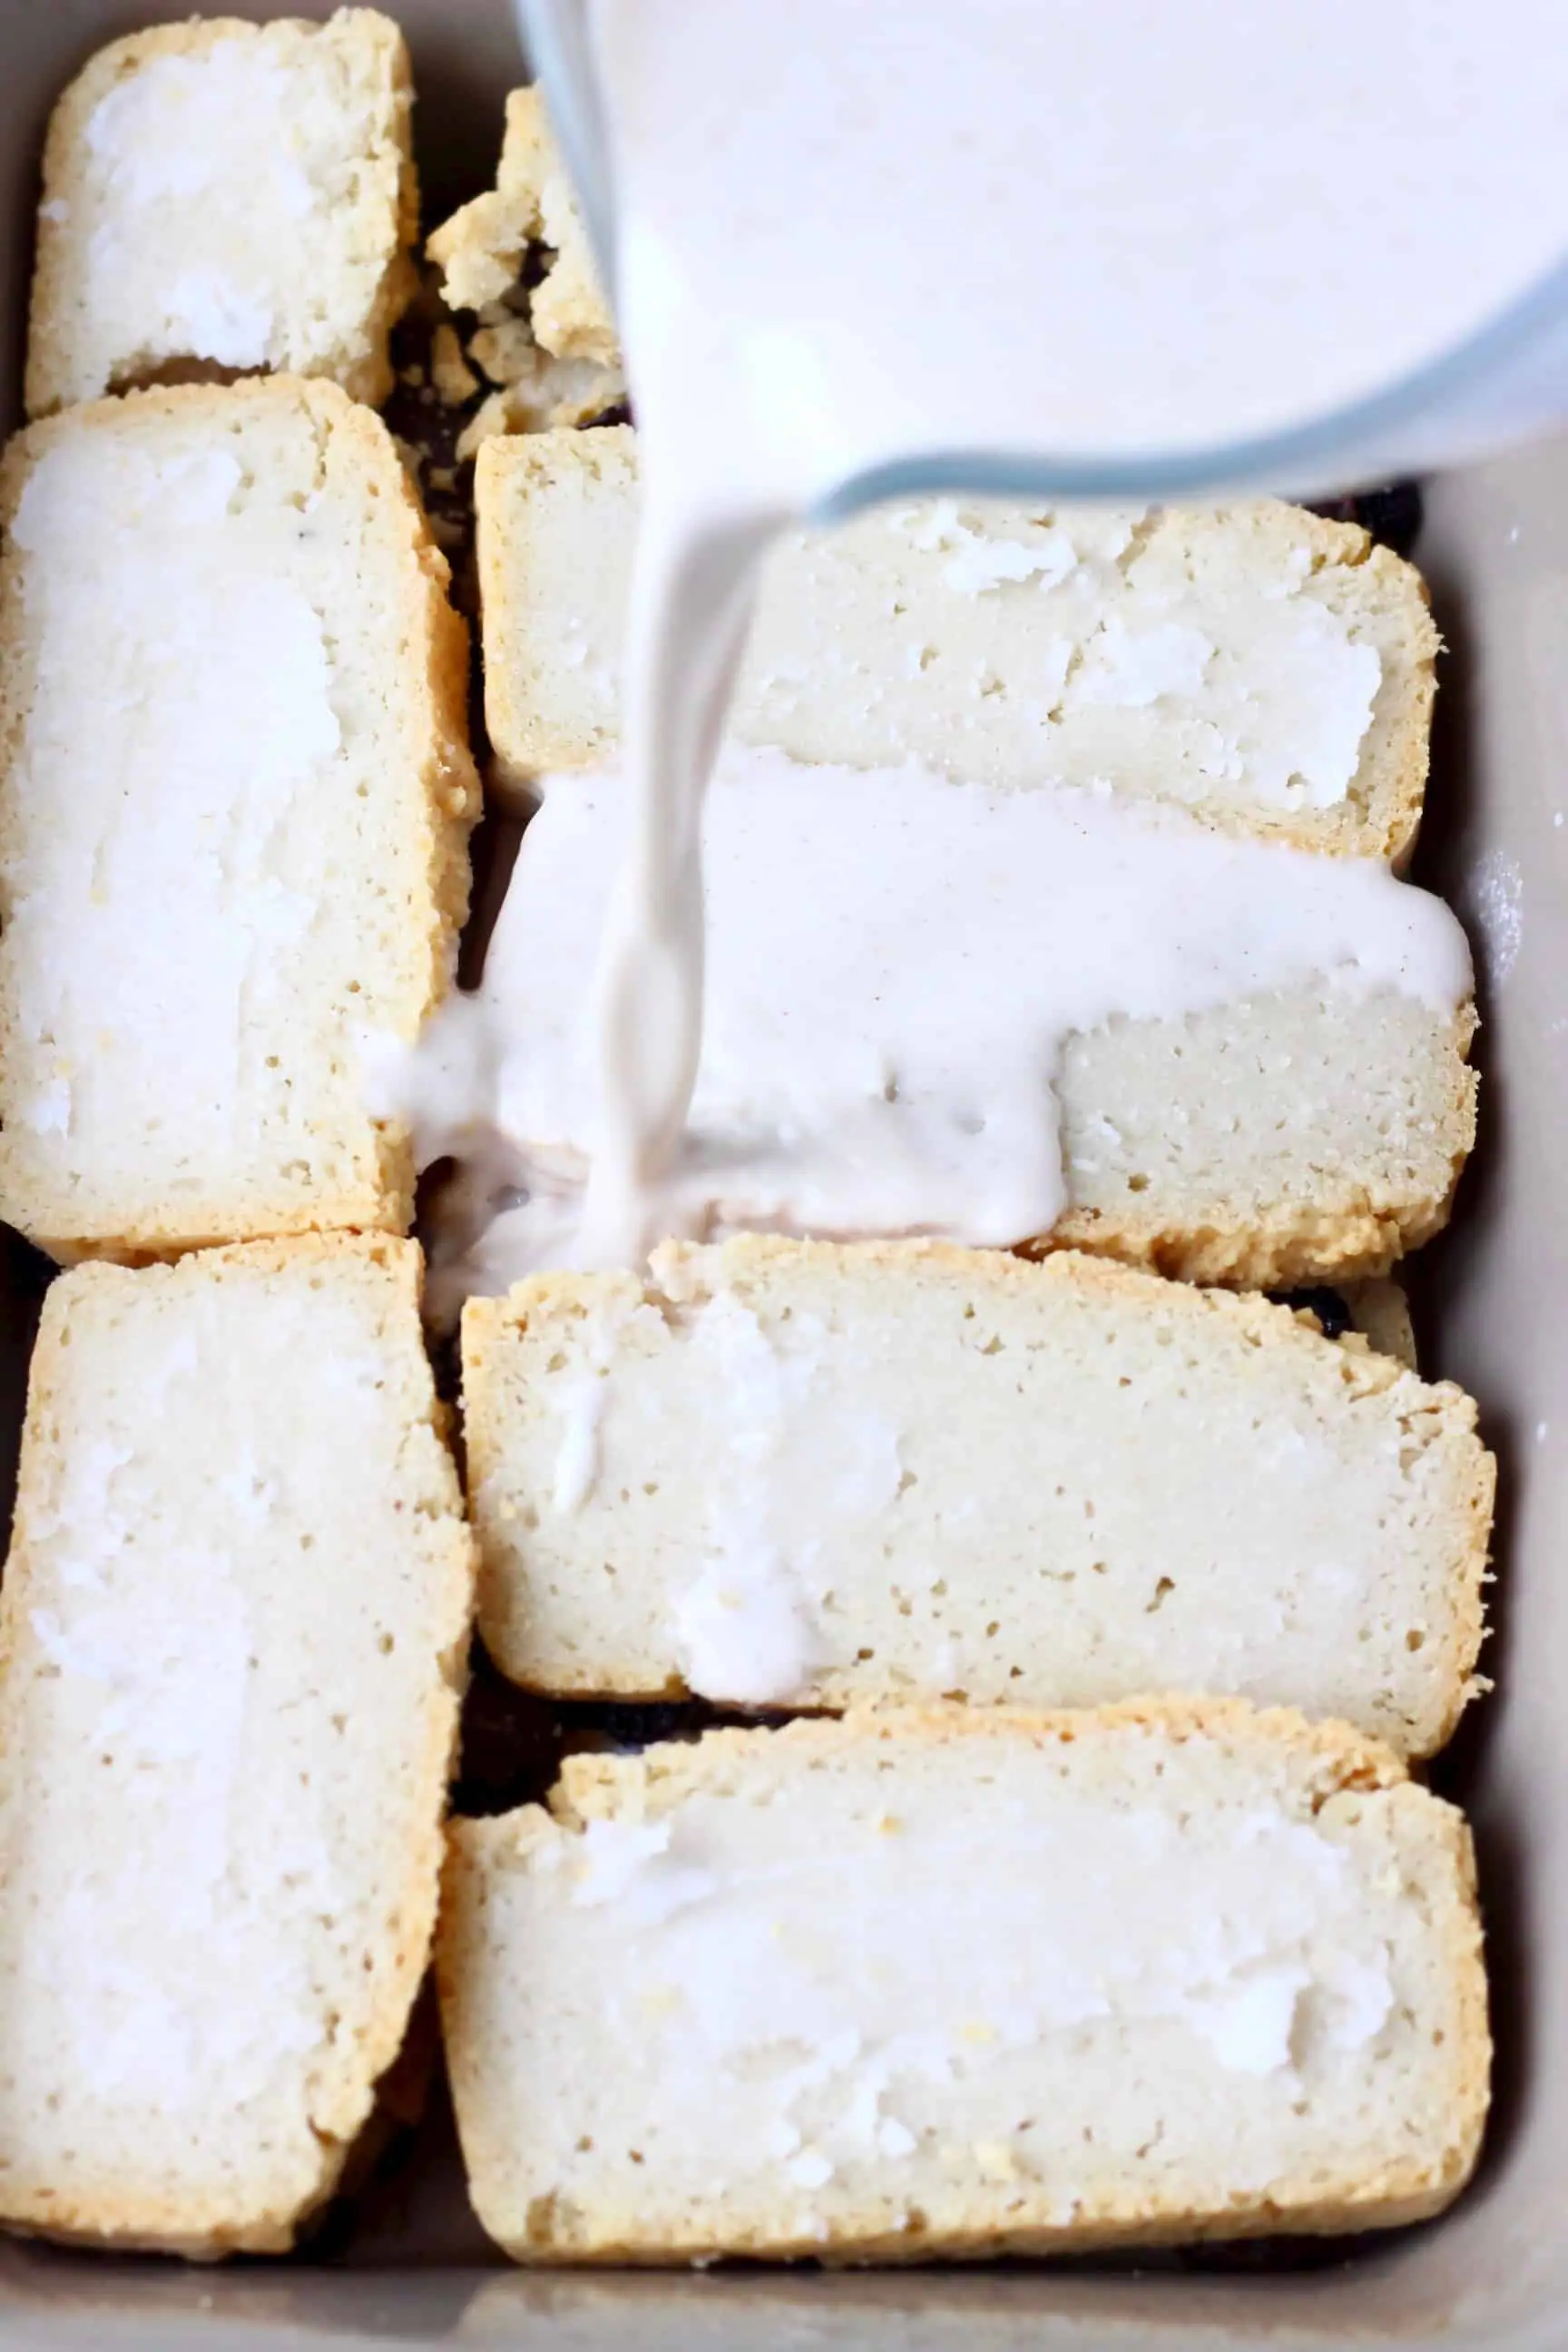 Slices of bread in a grey rectangular baking dish with a white cream being poured over the top with a glass jug